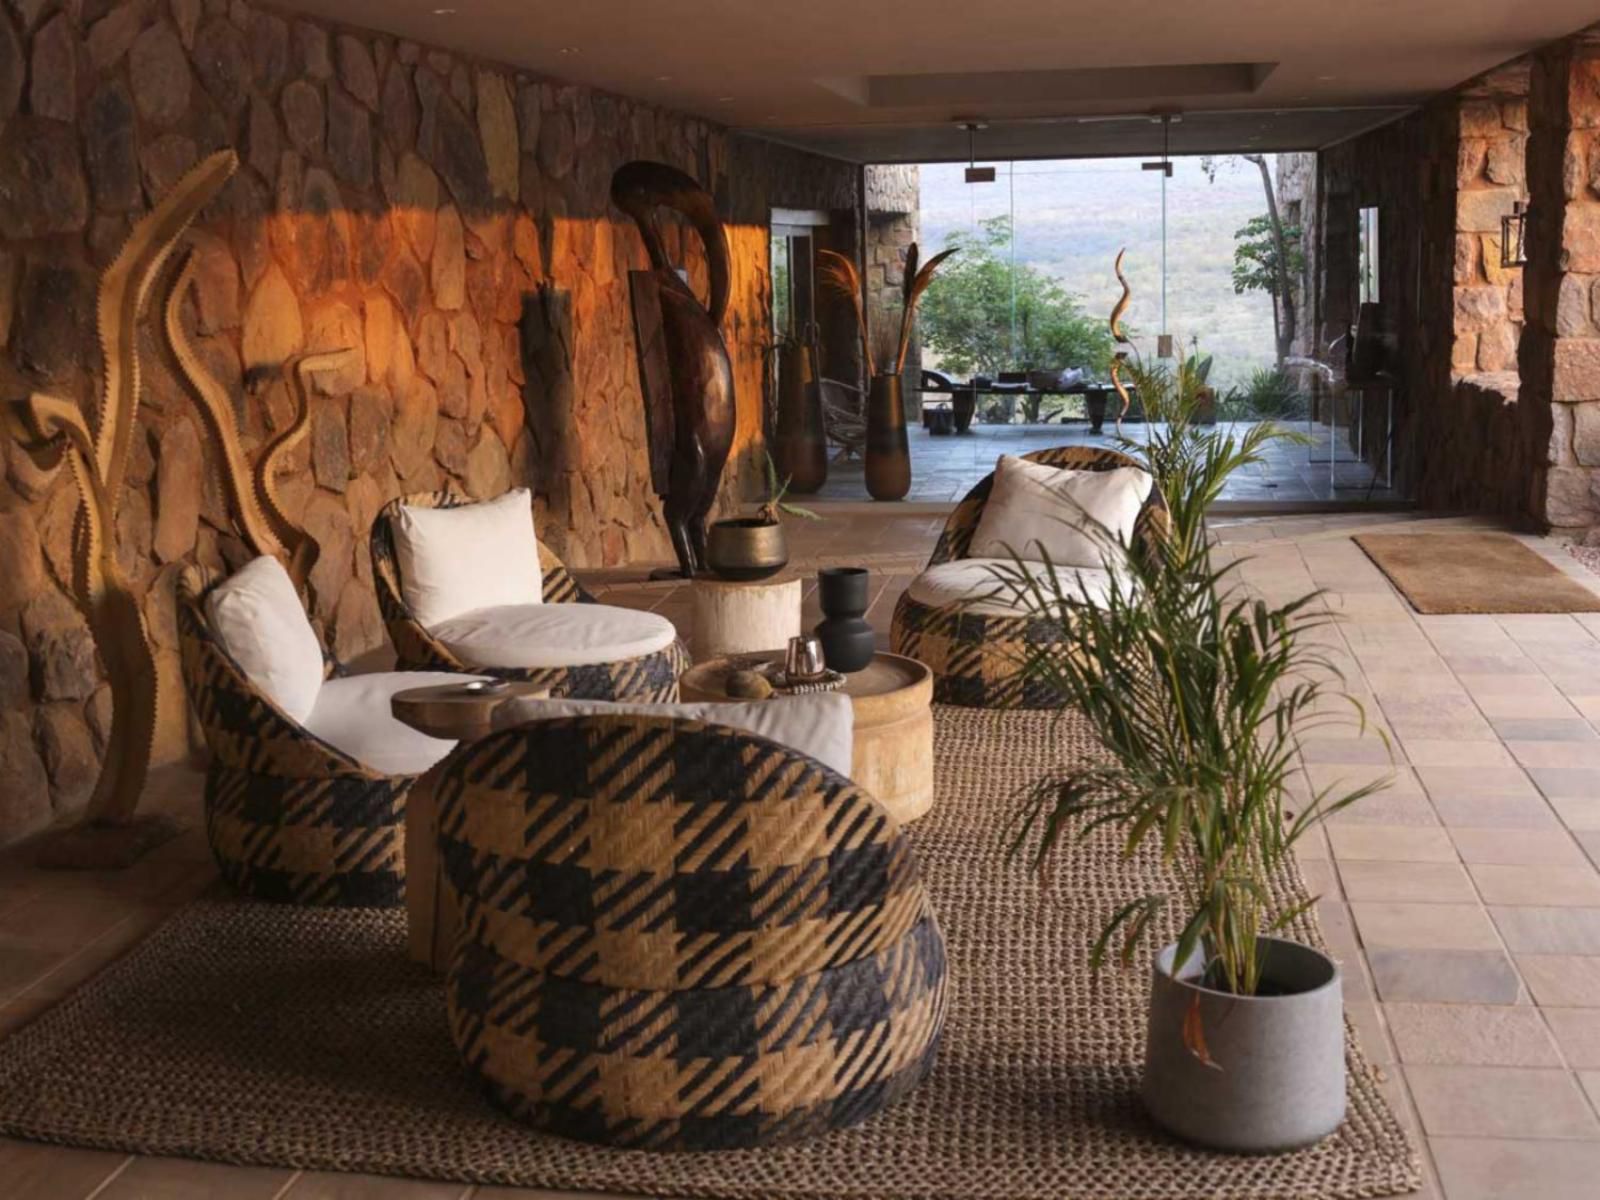 Matomo Exclusive Luxury Safari Lodge Welgevonden Game Reserve Limpopo Province South Africa Living Room